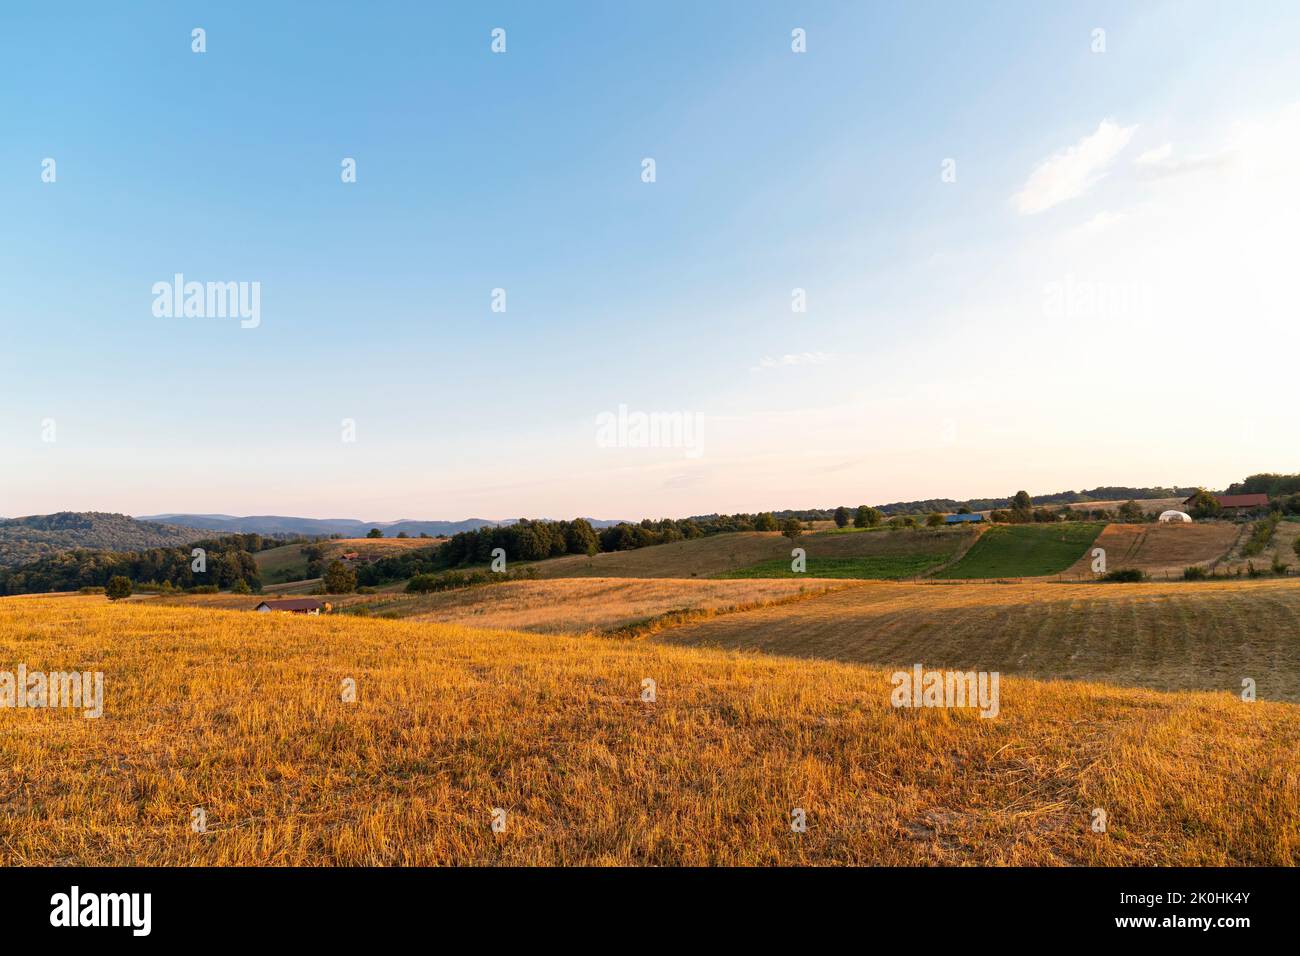 A rural field with yellow grass and wheat spikes at sunset, Romania Stock Photo